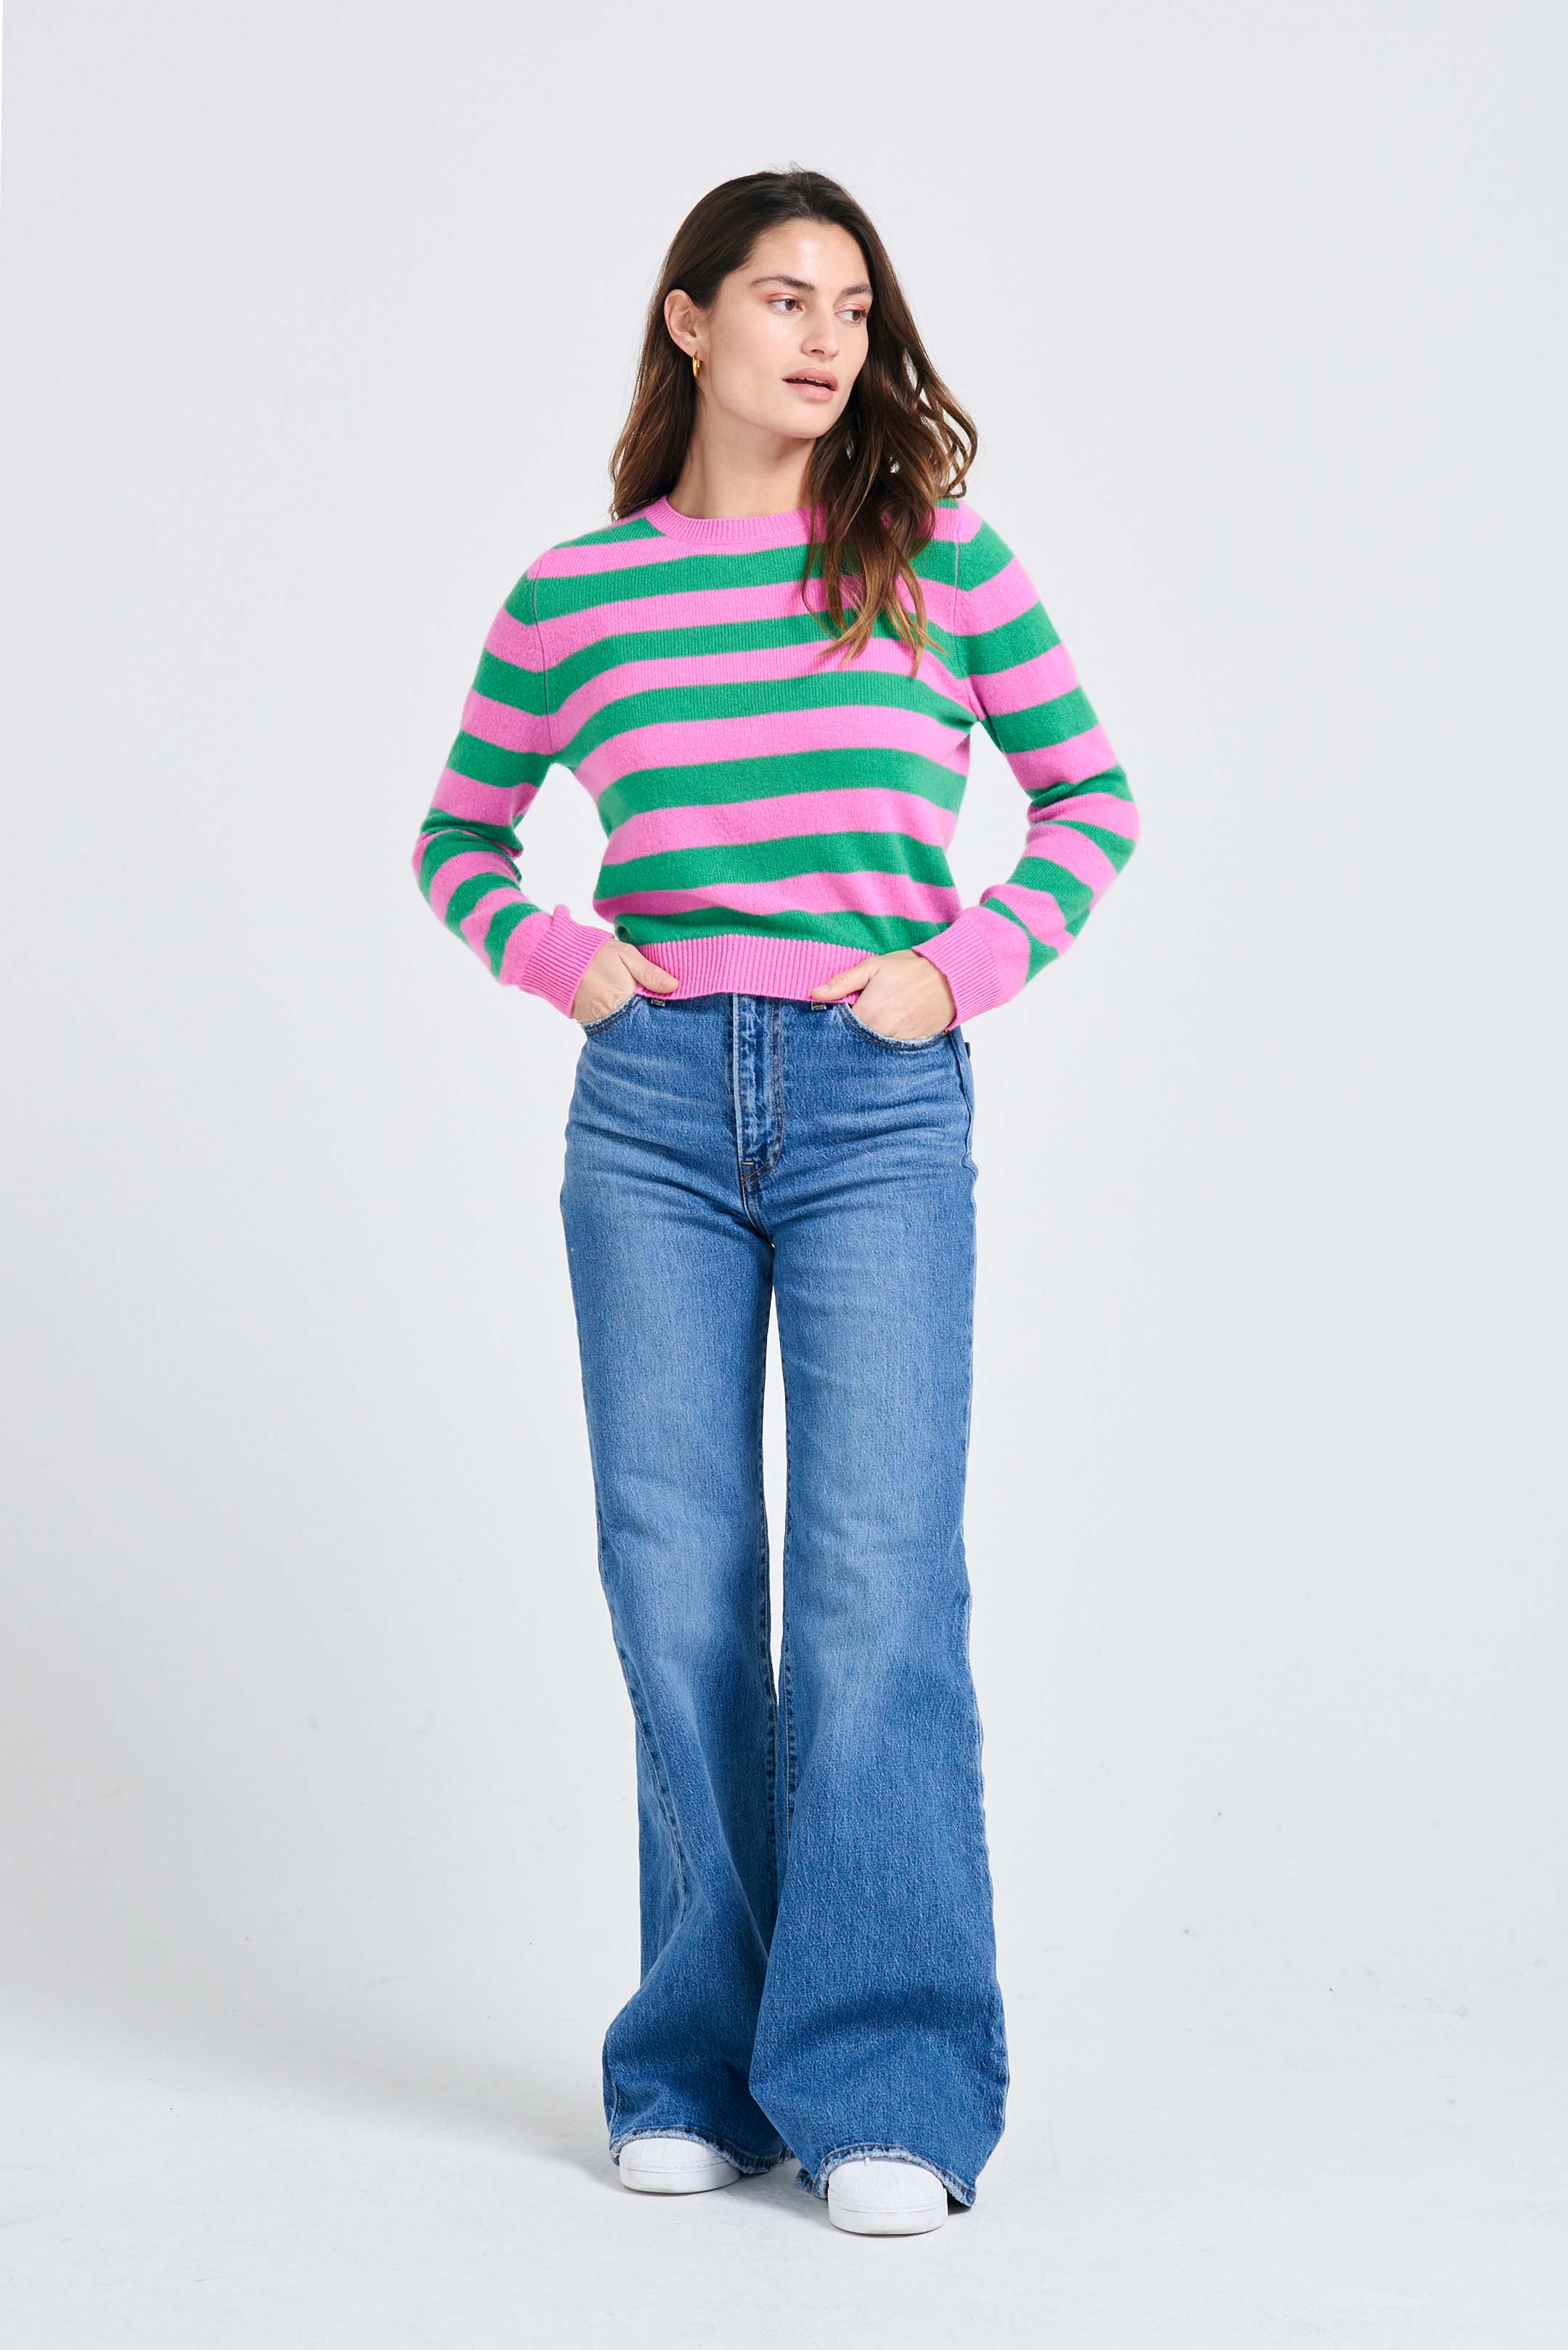 Brown haired female model wearing Jumper1234 Stripe cashmere crew neck jumper in peony and bright green